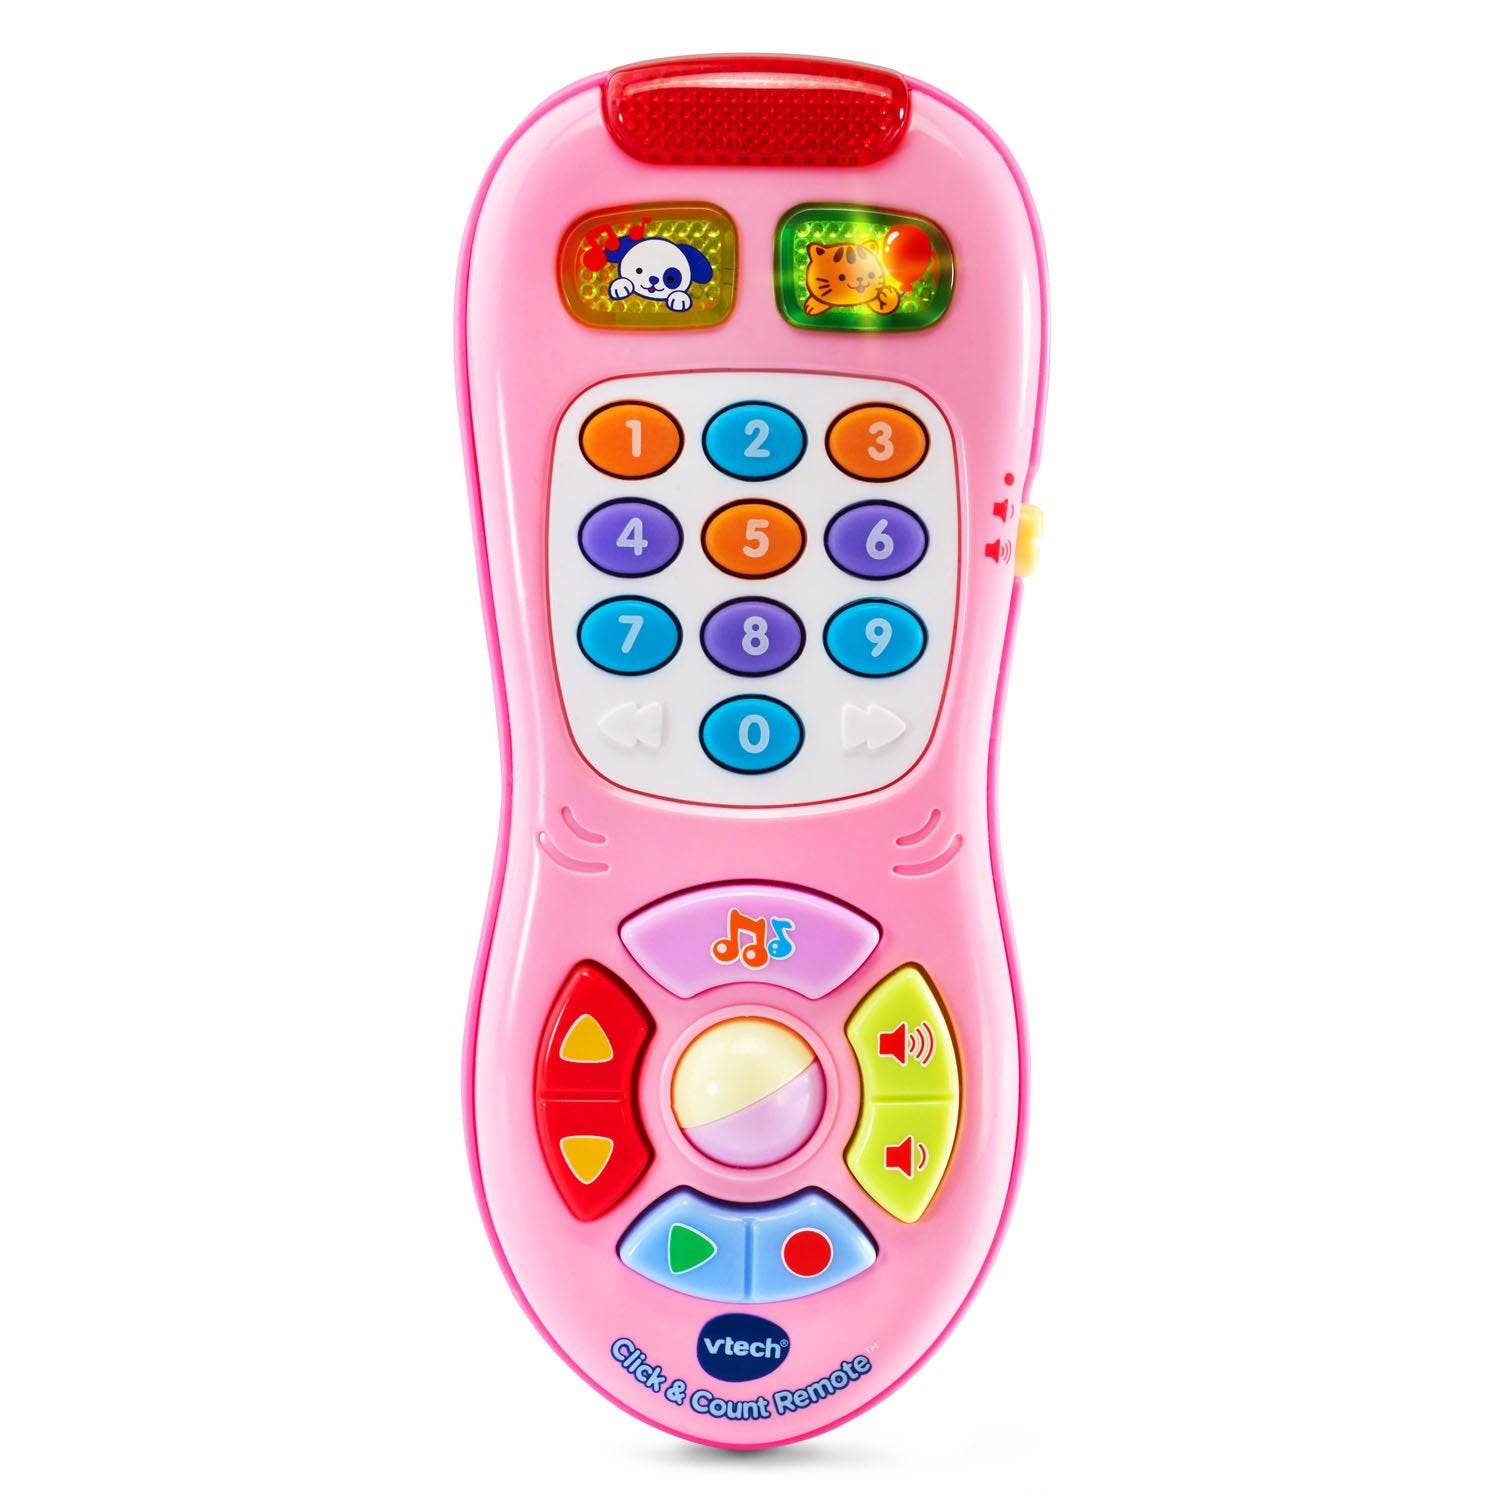 VTech Click and Count Remote, Black